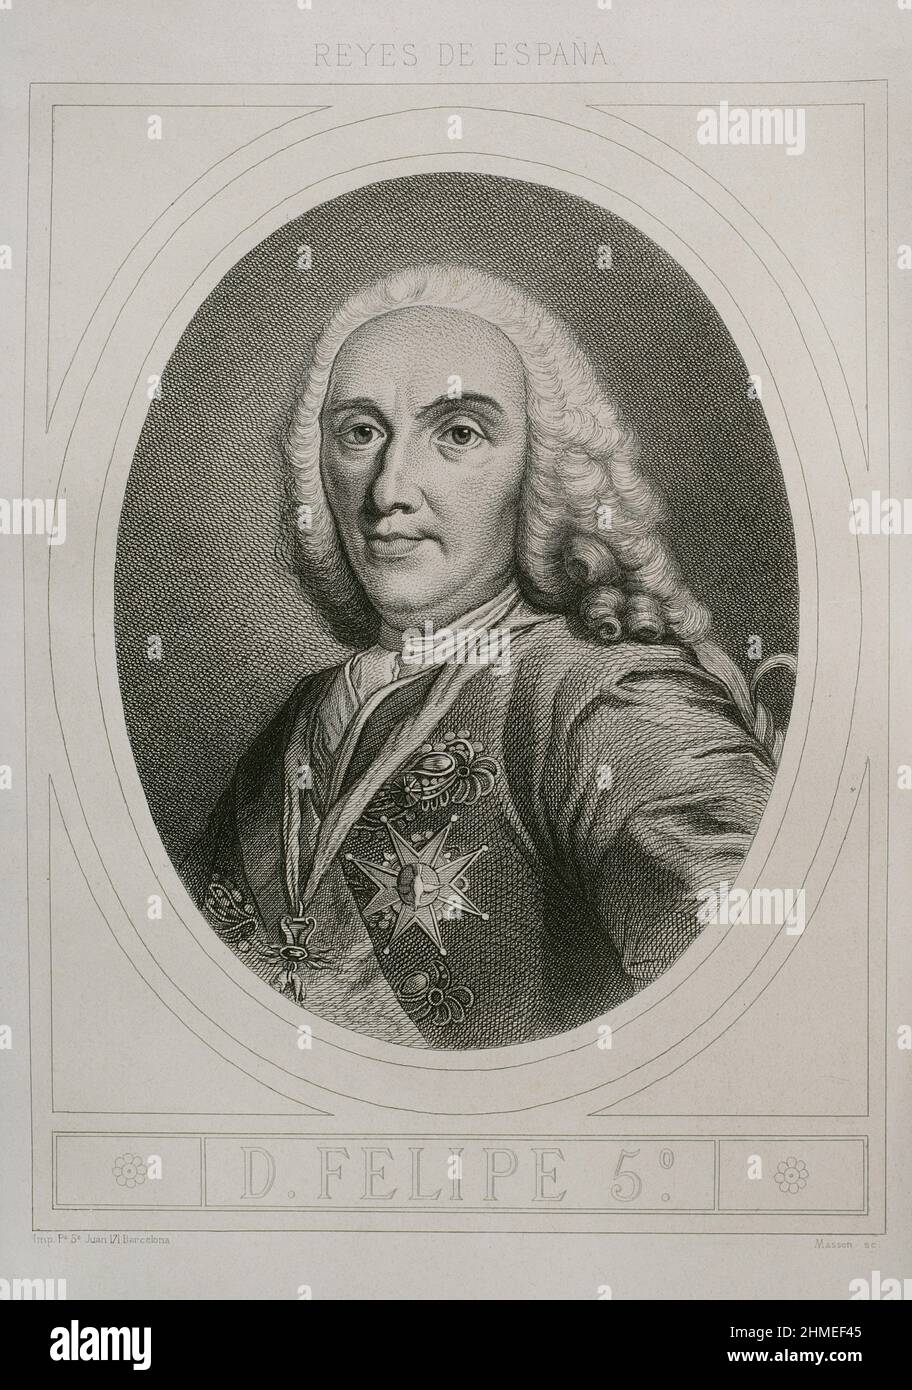 Philip V (1683-1746). King of Spain (1700-1746). Portrait. Engraving by Masson. Lithographed by Magín Pujadas. 'Historia General de España' by Modesto Lafuente. Volume IV. Published in Barcelona, 1879. Stock Photo